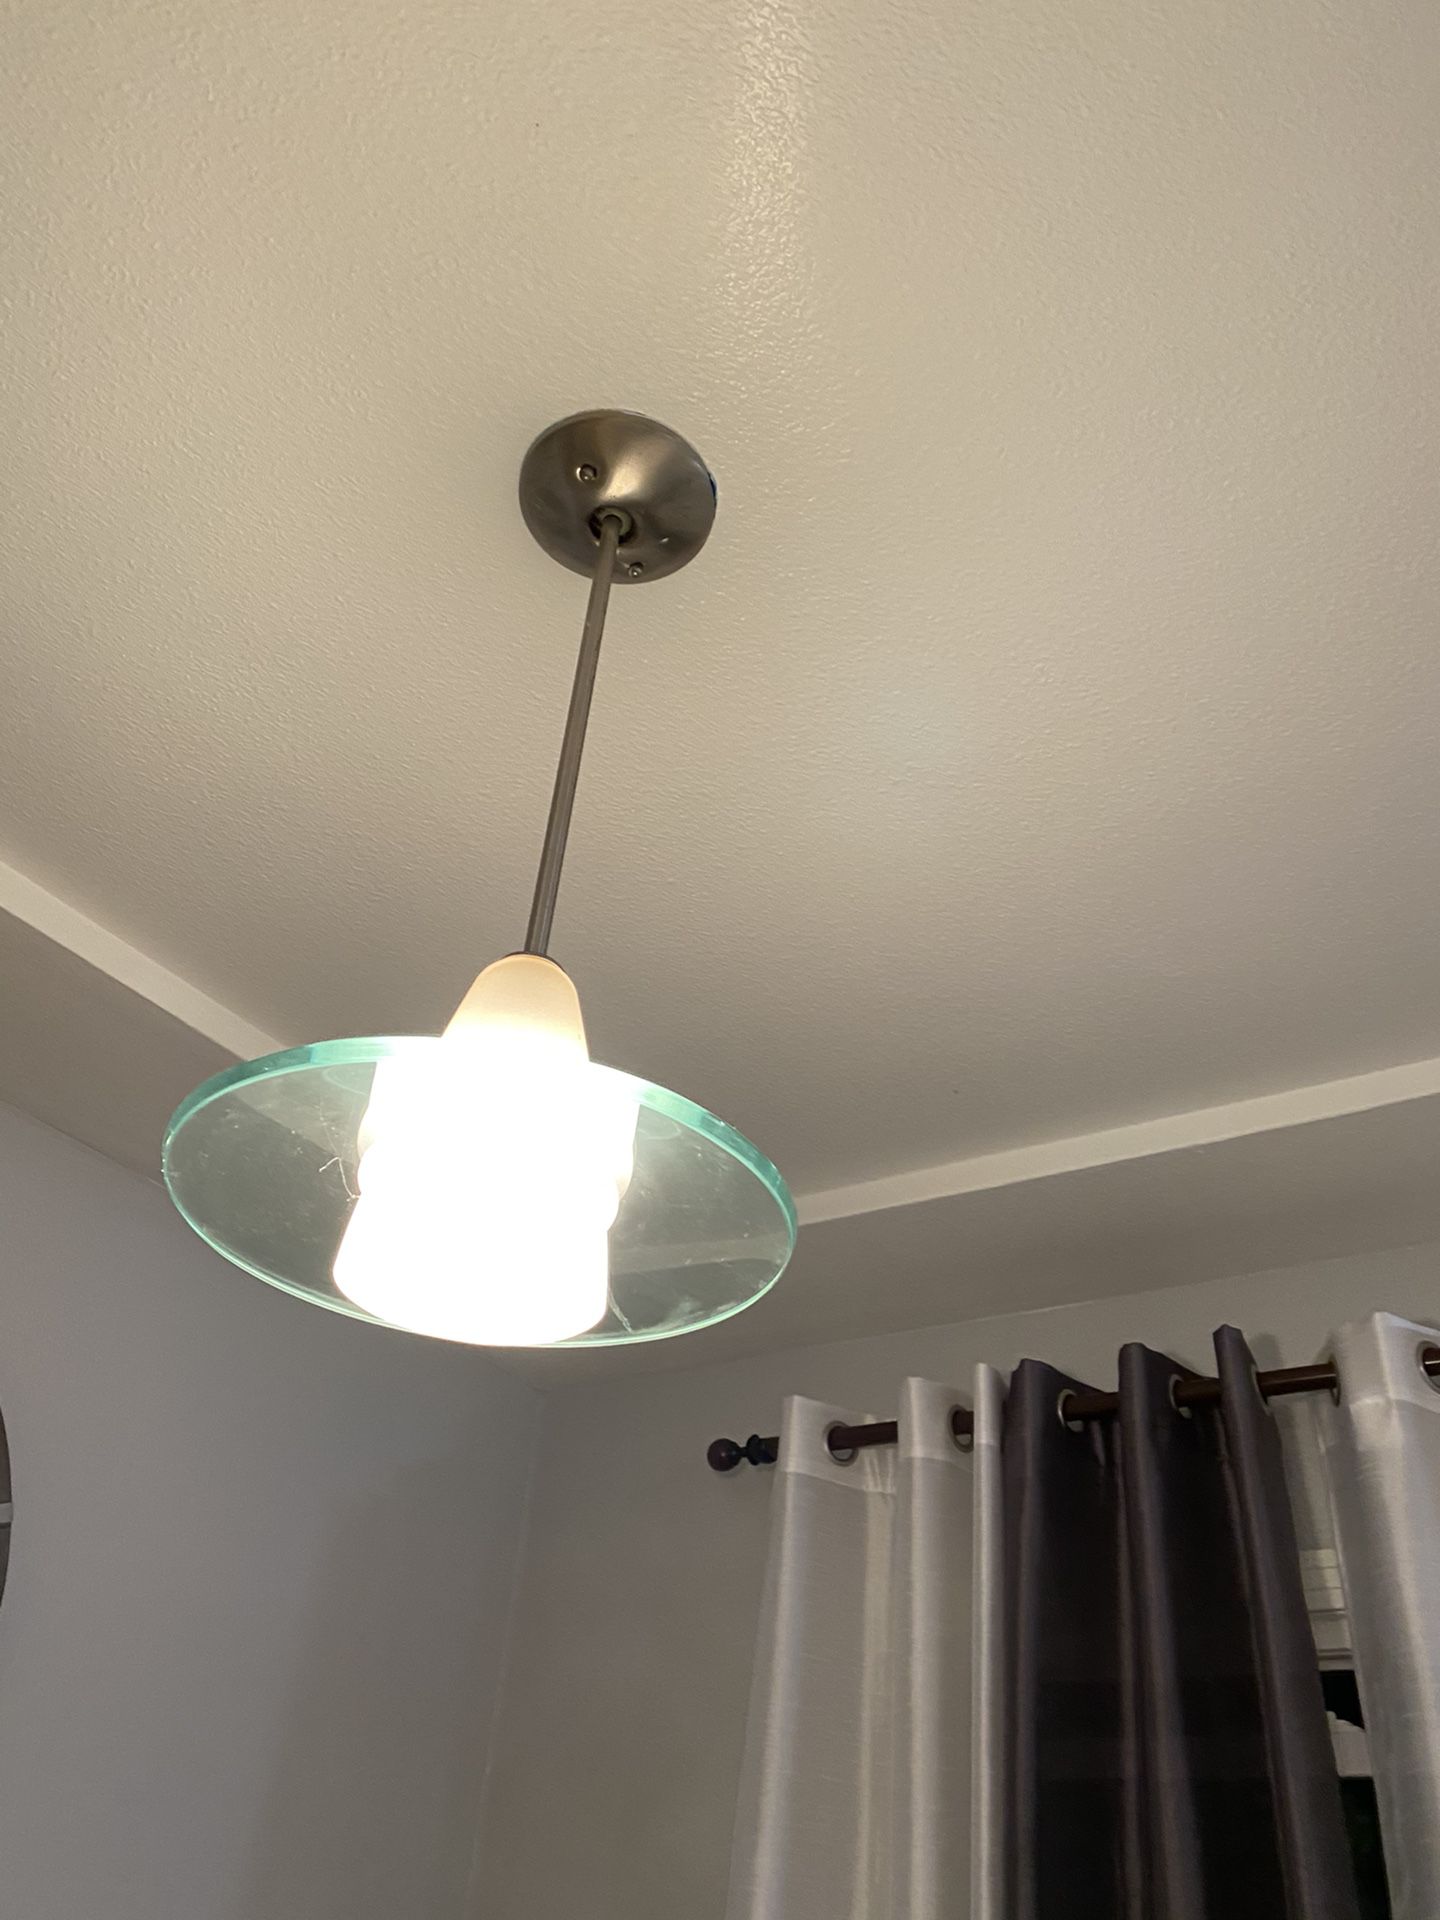 Two modern style light fixtures